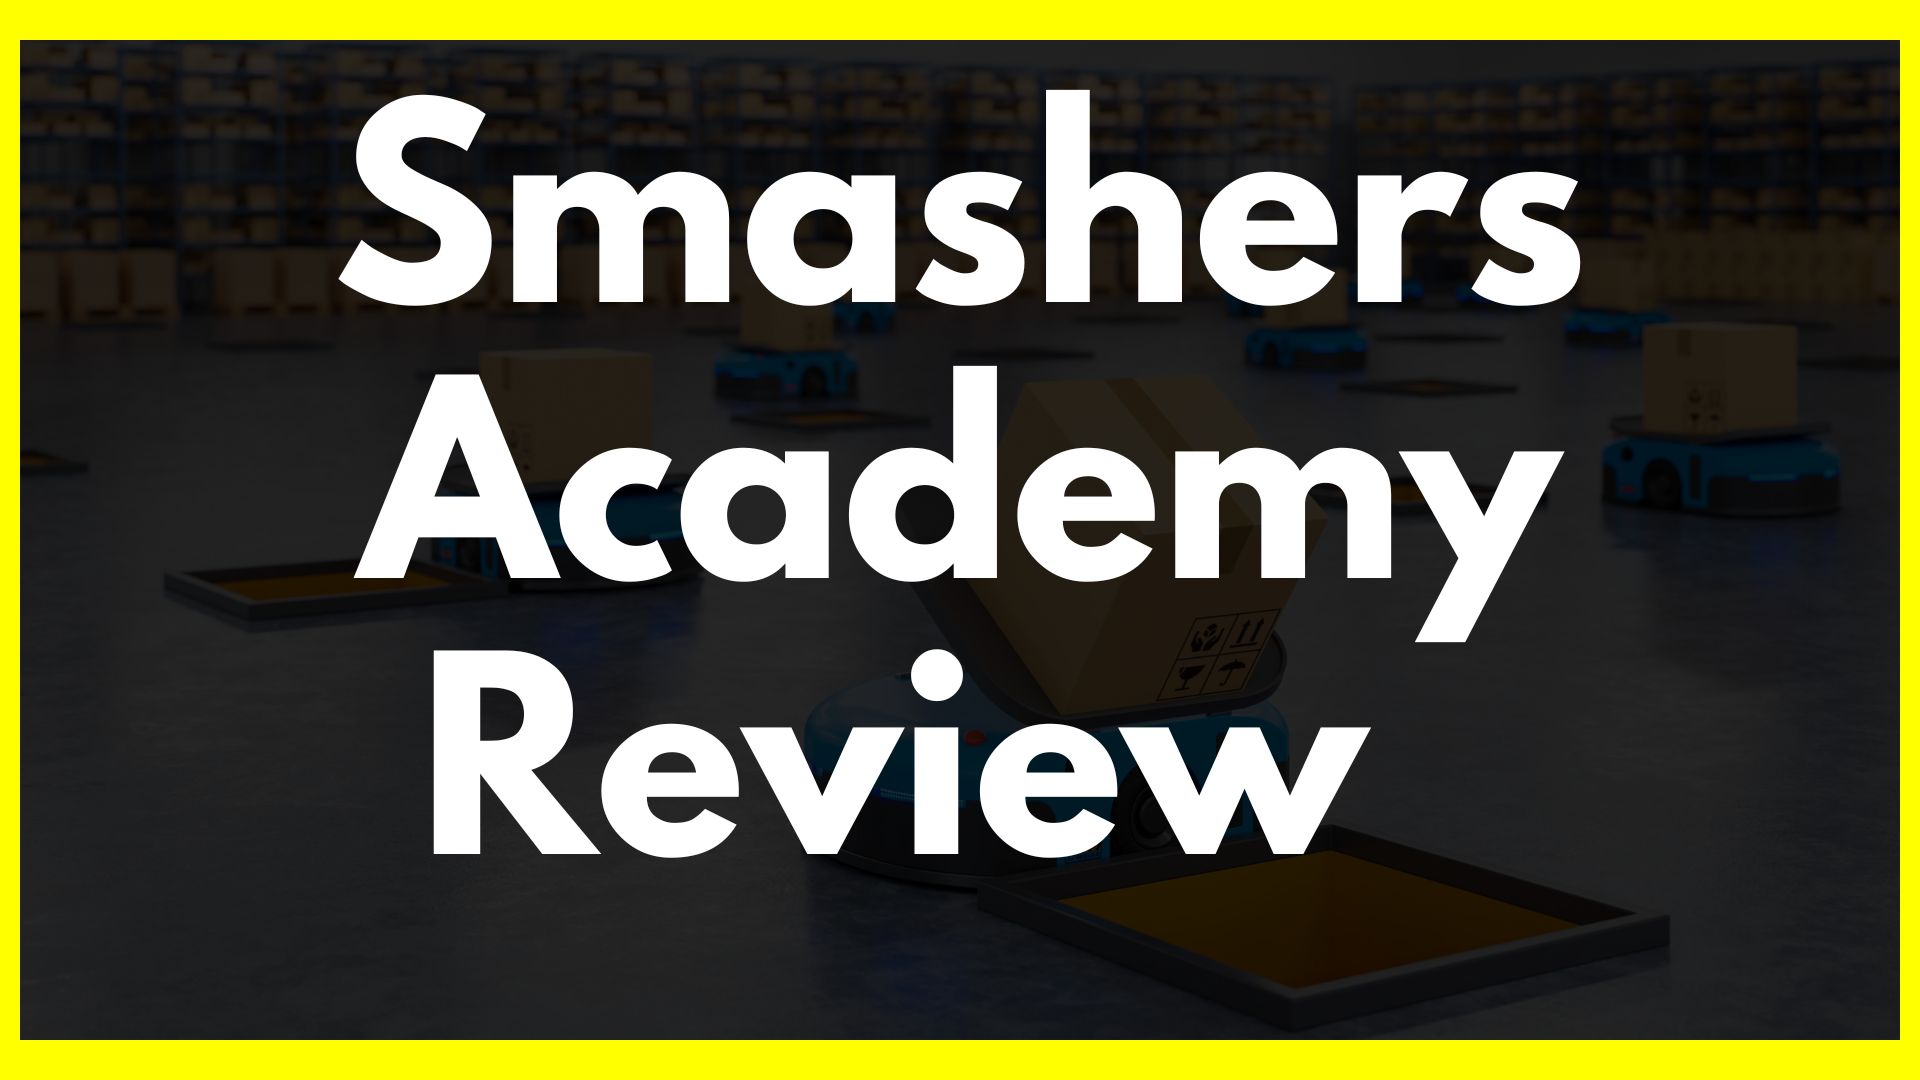 Smashers Academy Review